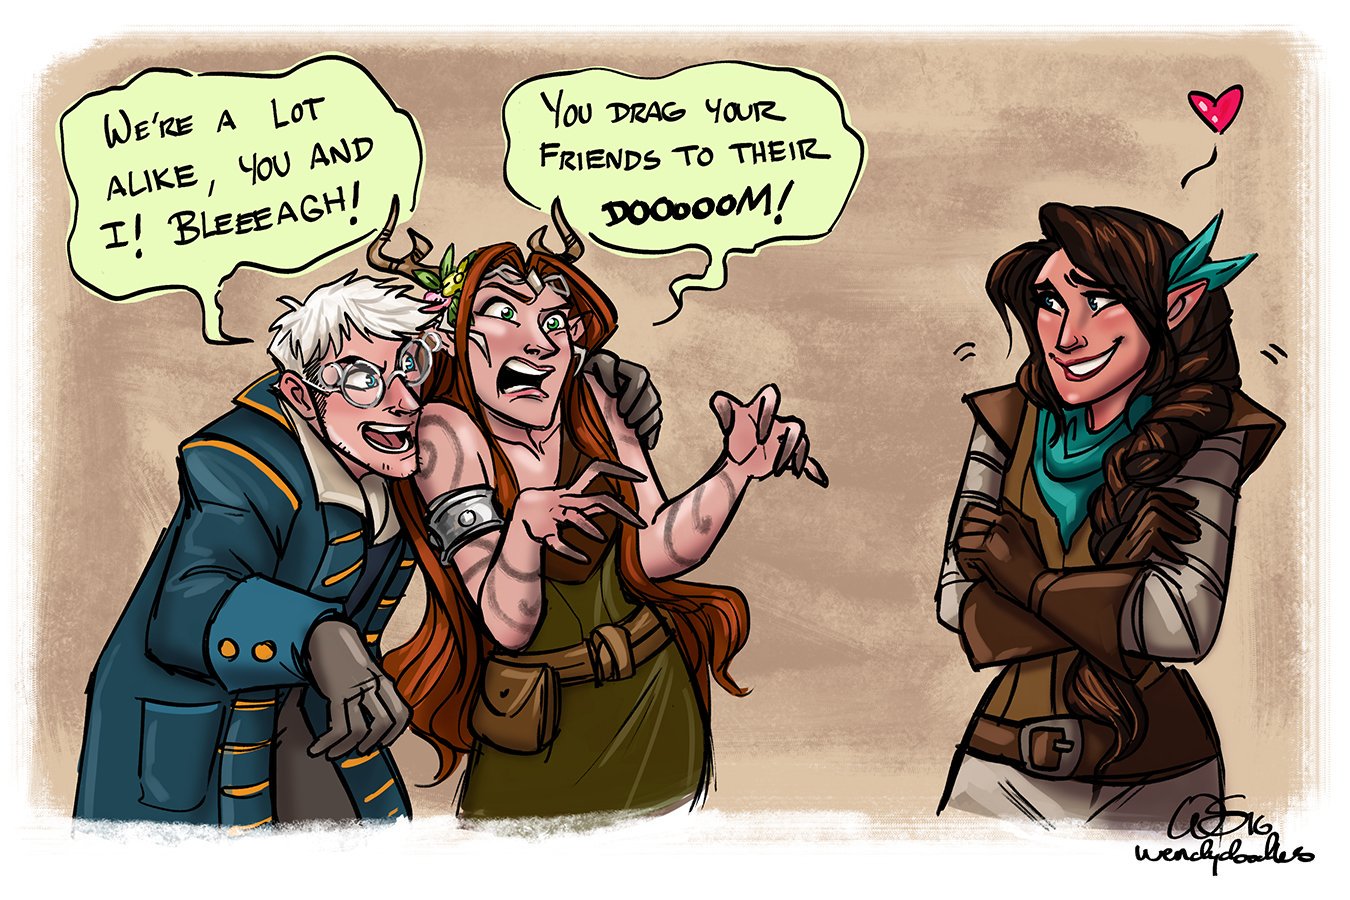 Image Episode 63 Percy And Keyleth Cheer Up Vex By Wendy Sullivan 